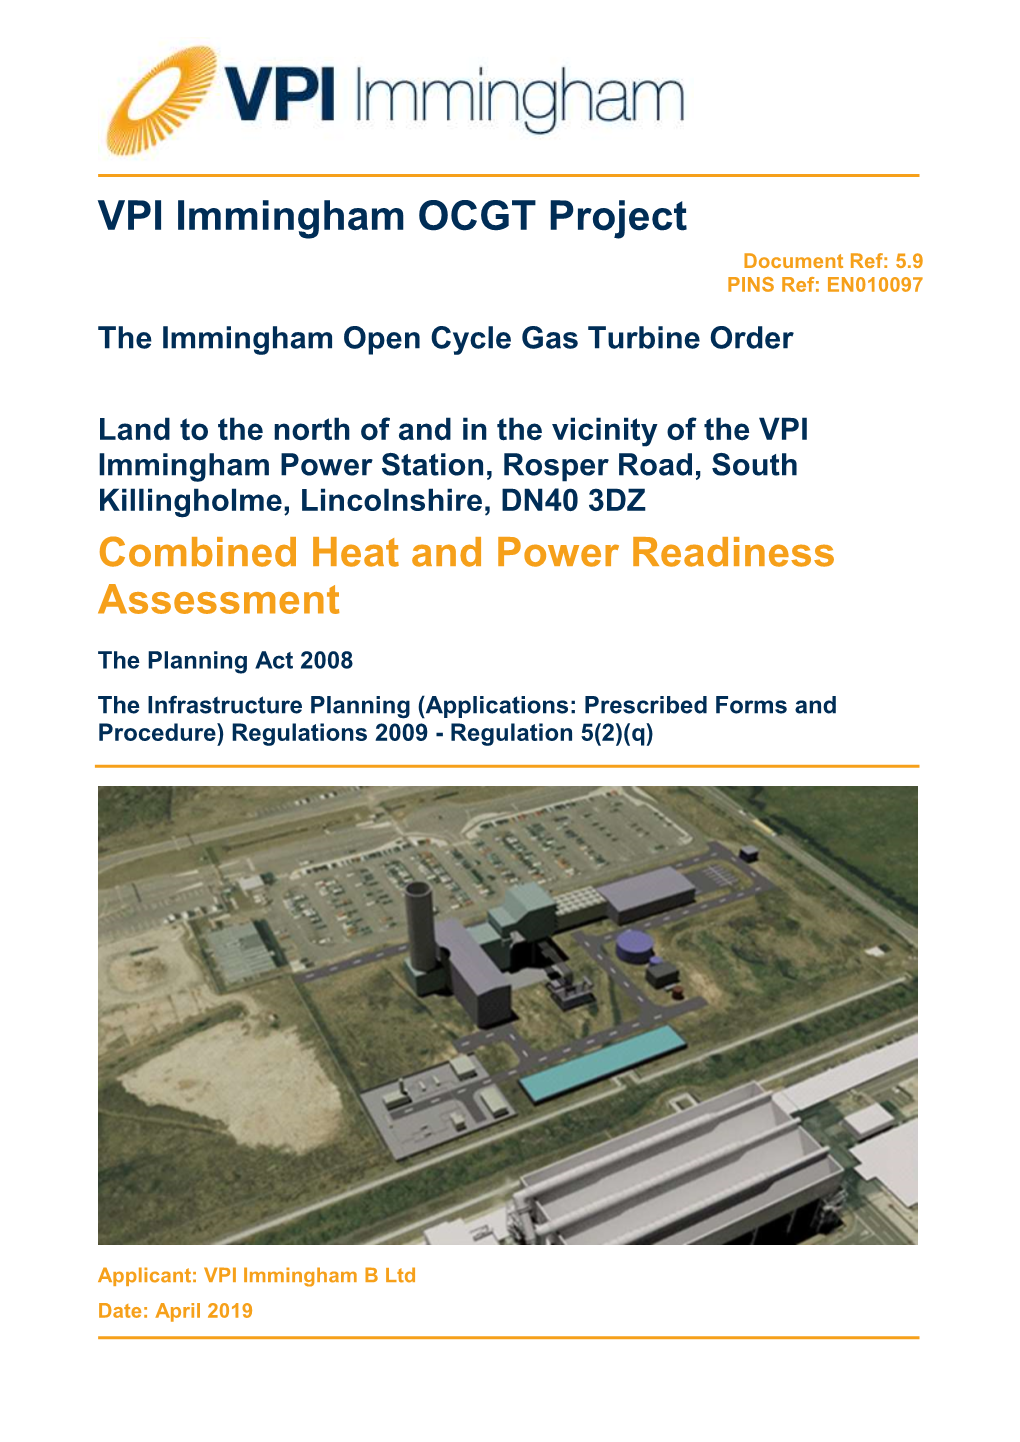 VPI Immingham OCGT Project Combined Heat and Power